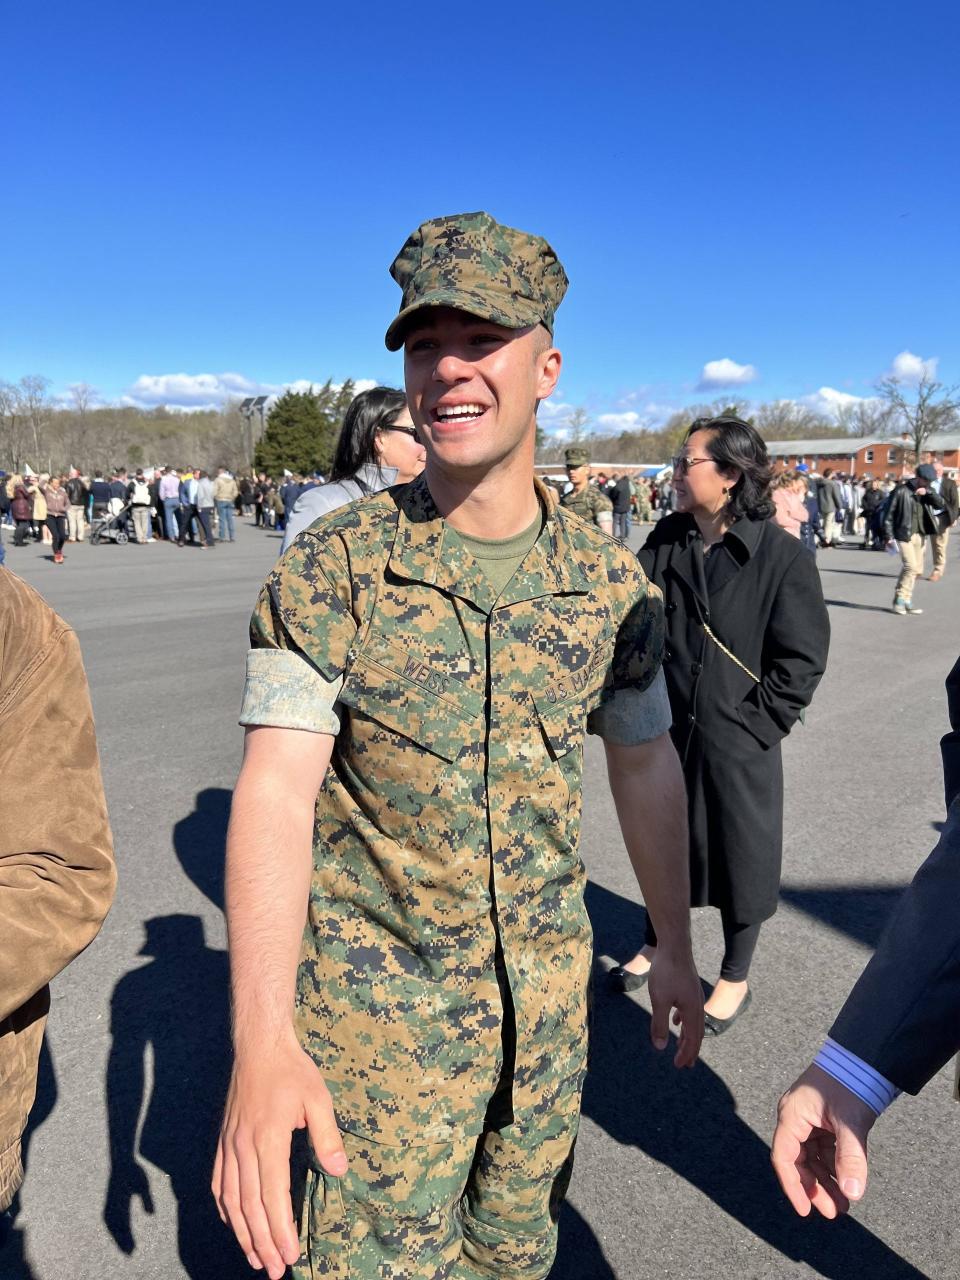 U.S. Marine 2nd Lt. Matthew Weiss of Tenafly. After graduating from the University of Pennsylvania and working at a defense contractor, Weiss enlisted in the Marines. He has now written a book on how to improve recruiting about Generation Z.